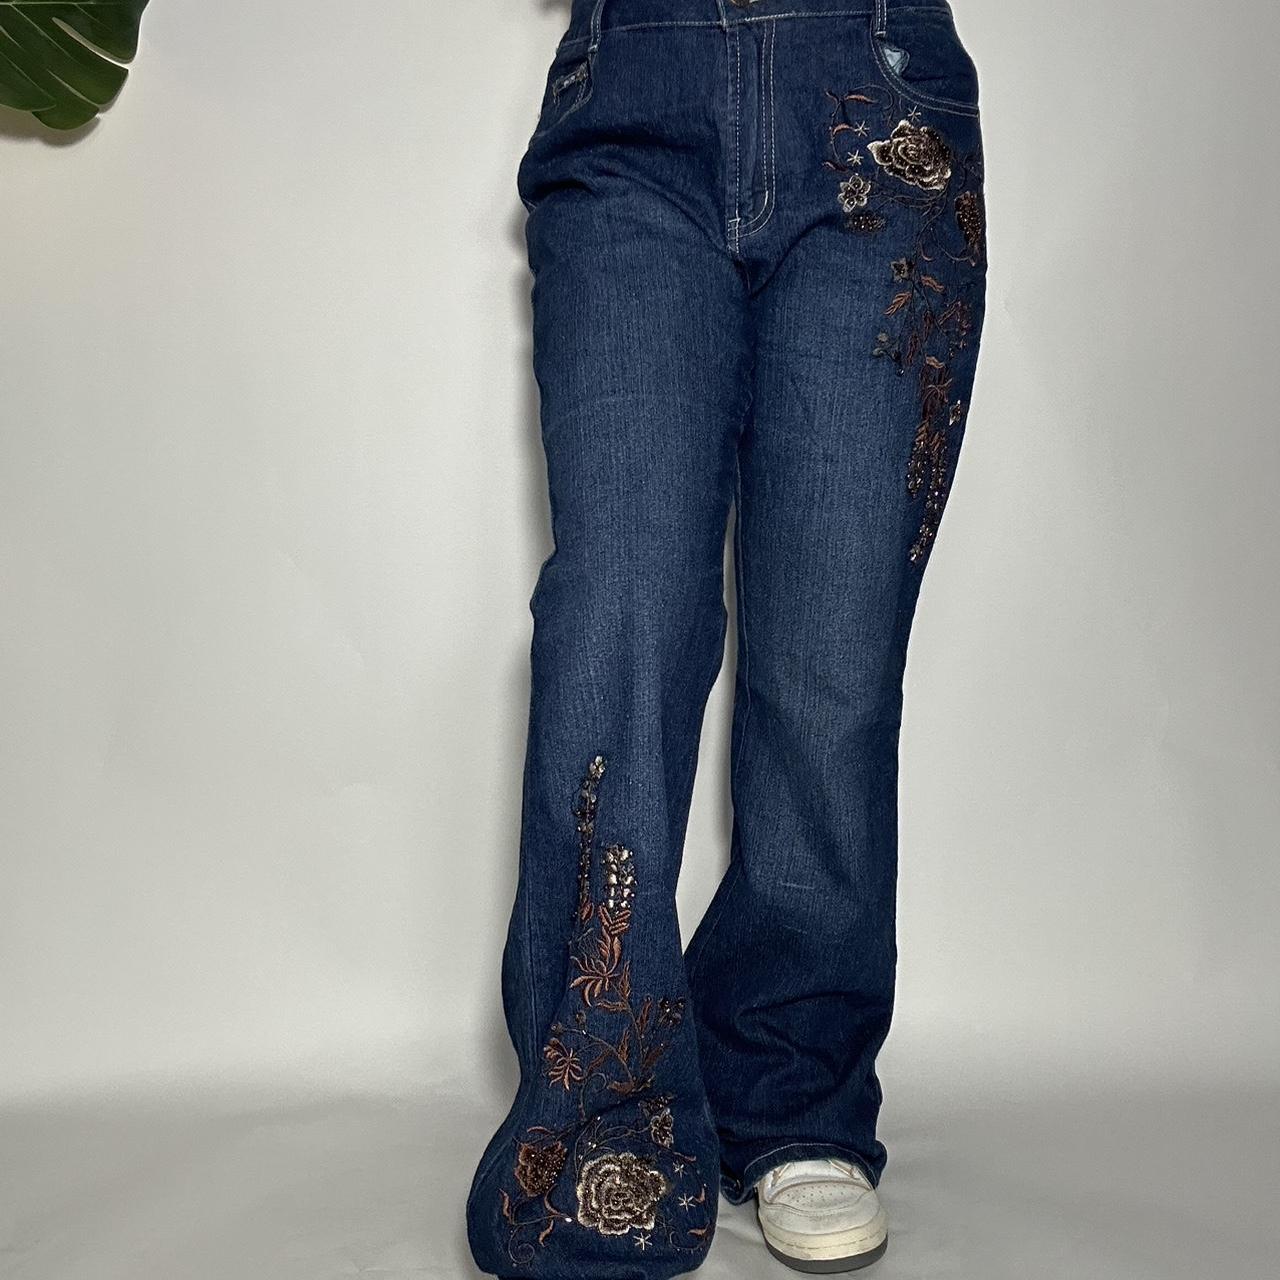 Vintage 90s embroidered floral bootcut jeans